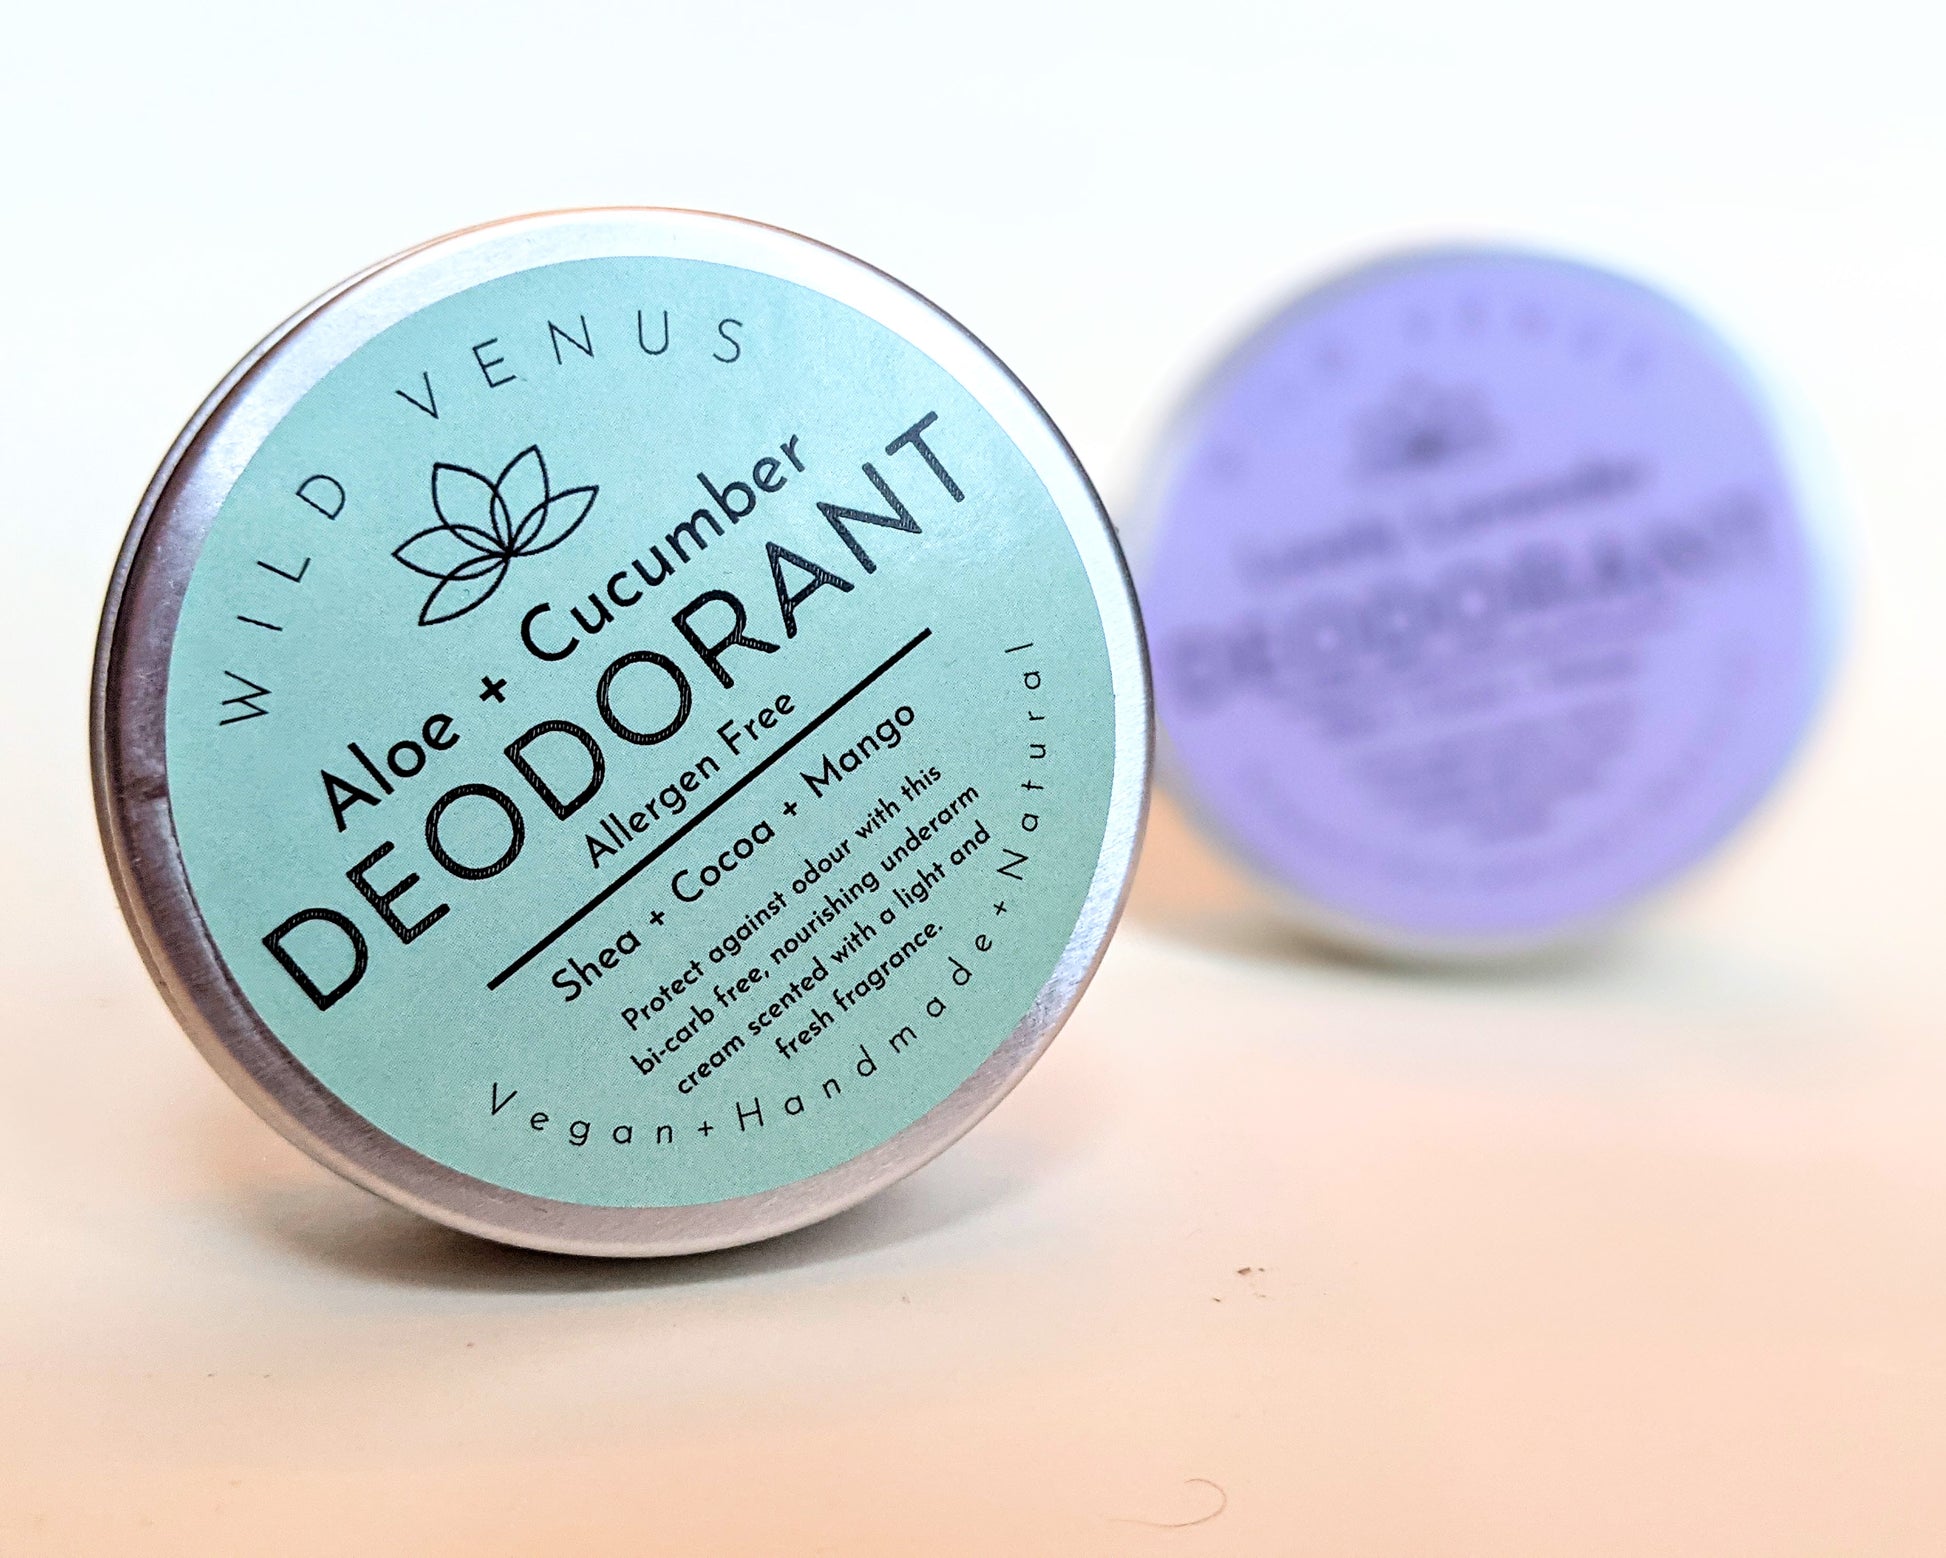 Aloe and cucumber deodorant in front of lovely lavender deodorant. 